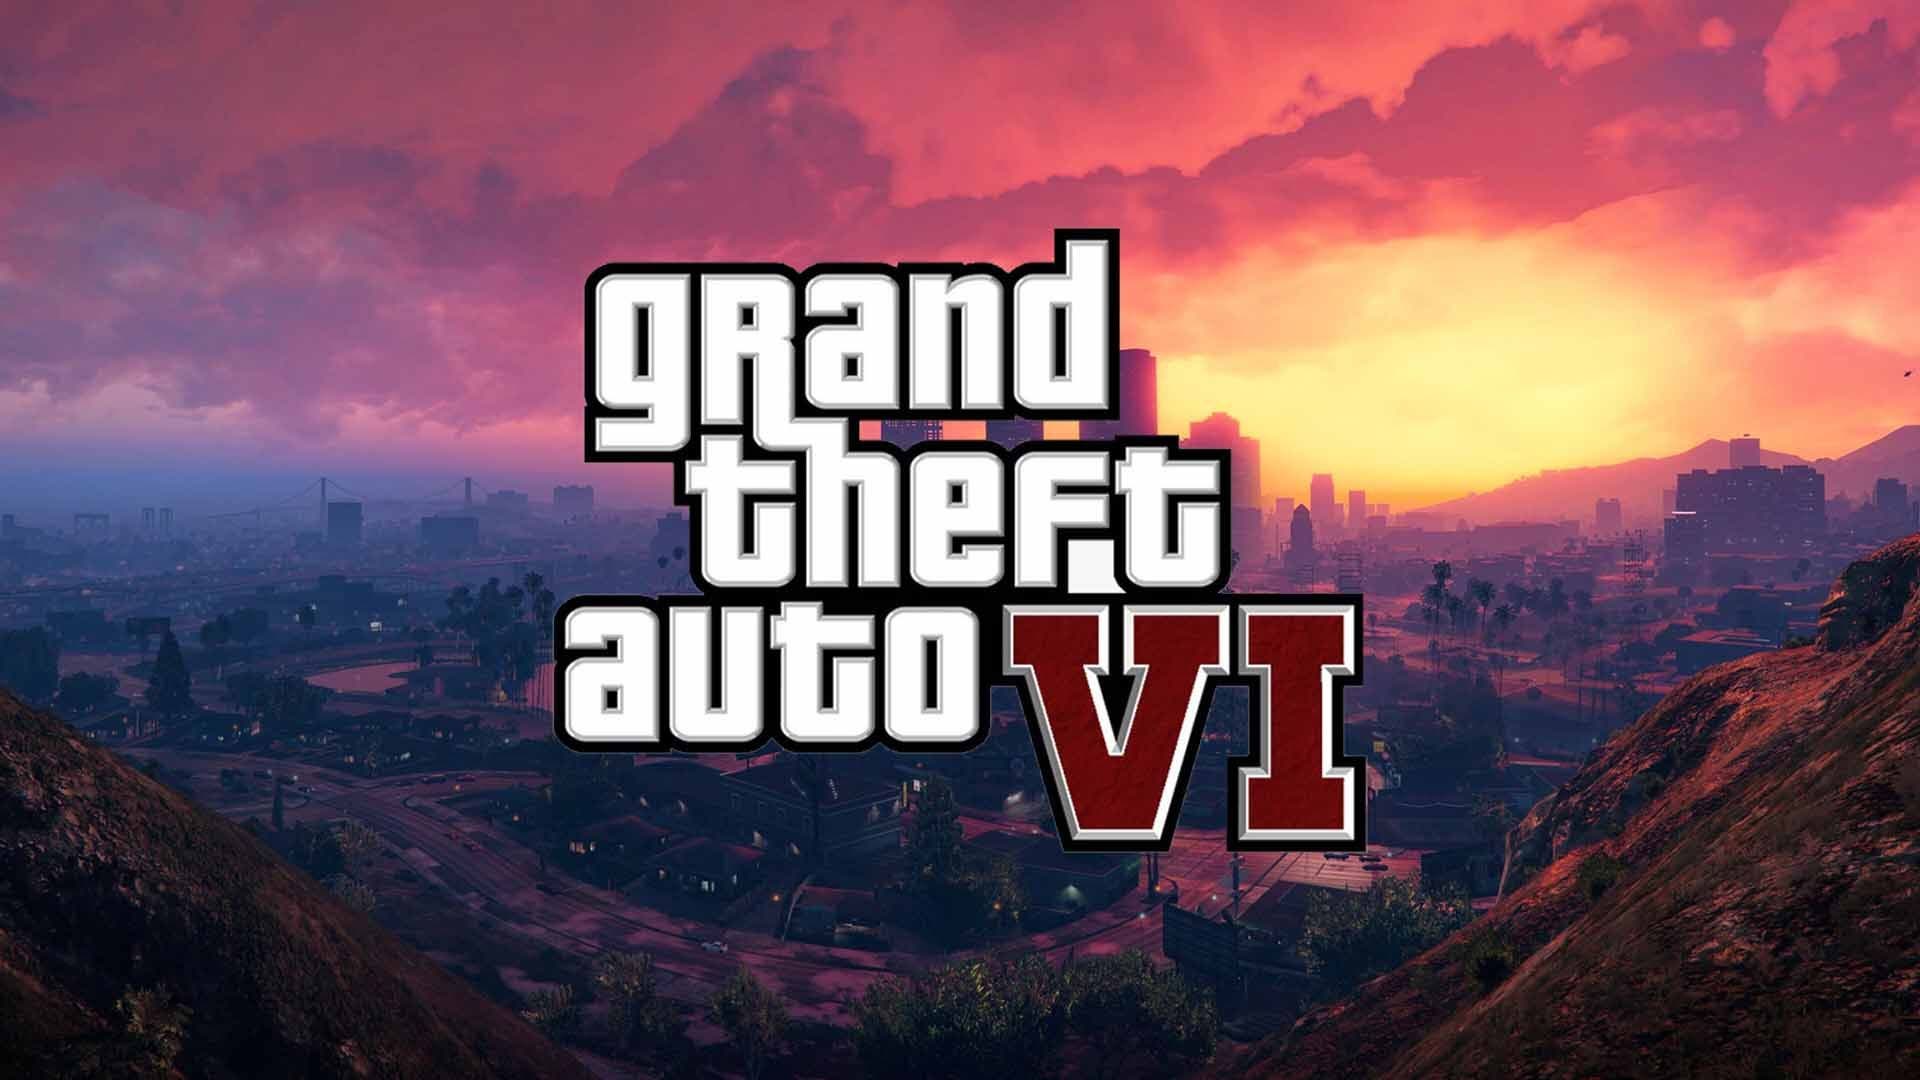 GTA 6 expected release date hinted by Microsoft leaks - The SportsRush